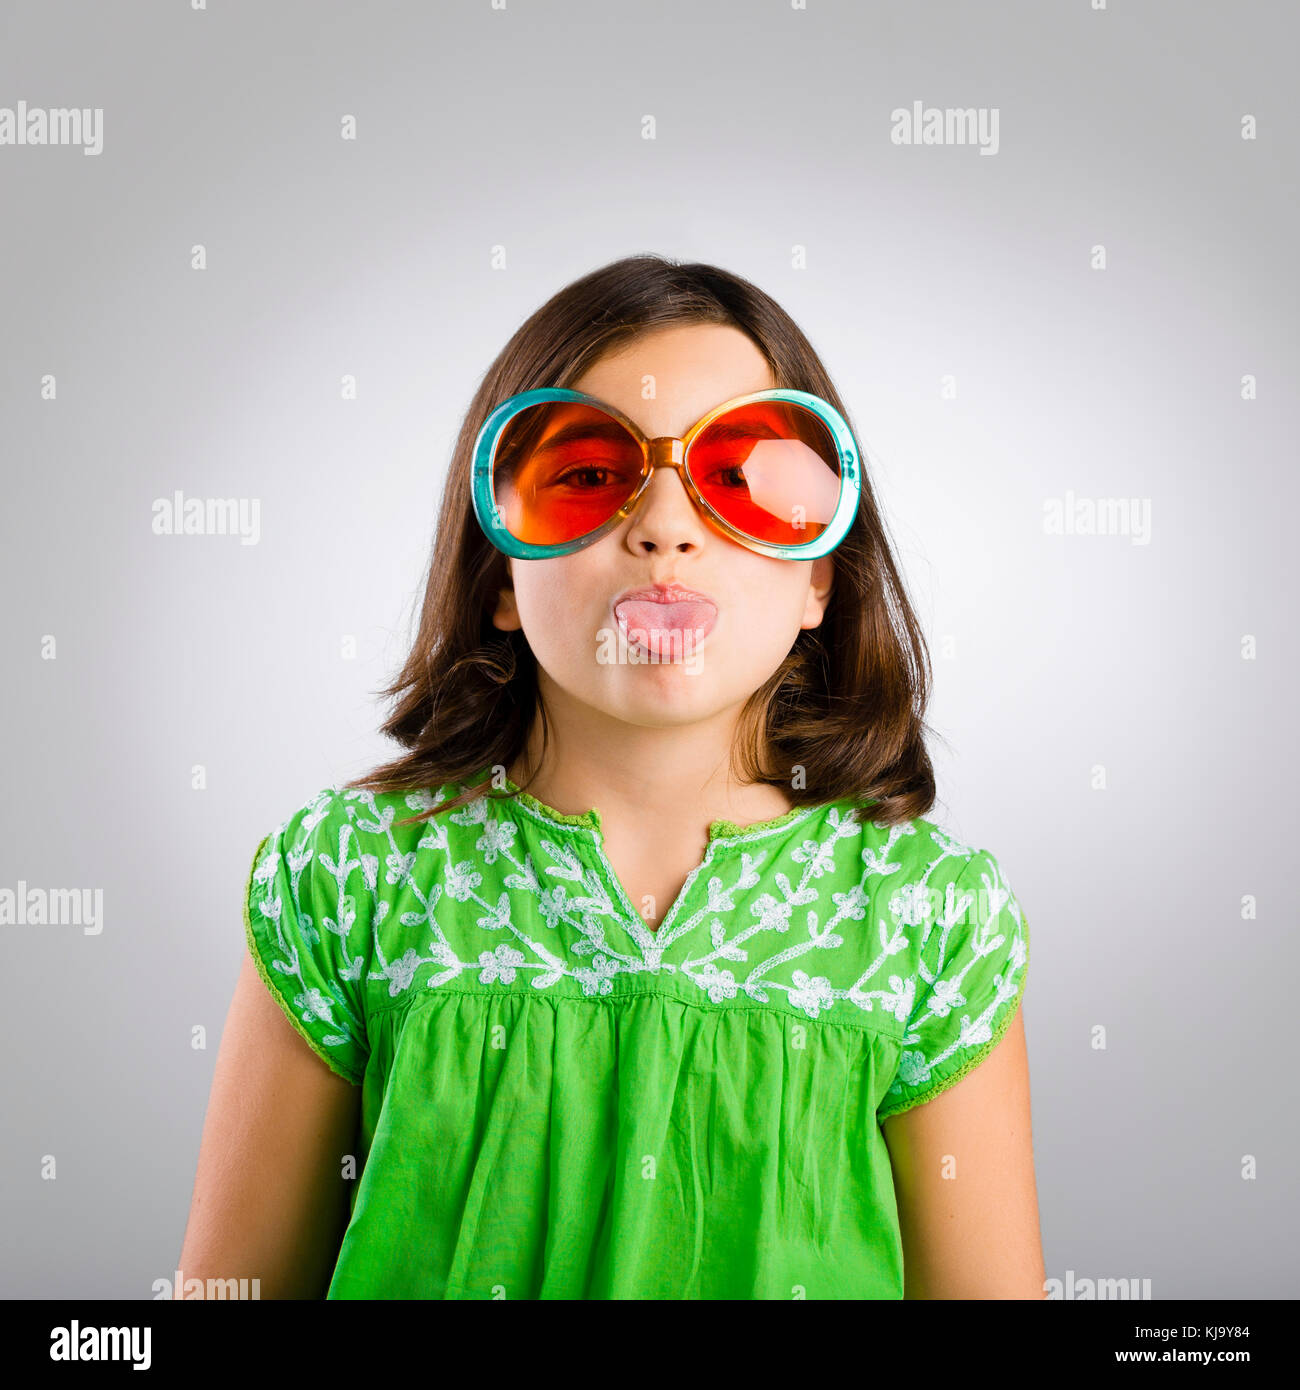 Portrait of a happy young girl wearing funny sunglasses Stock Photo